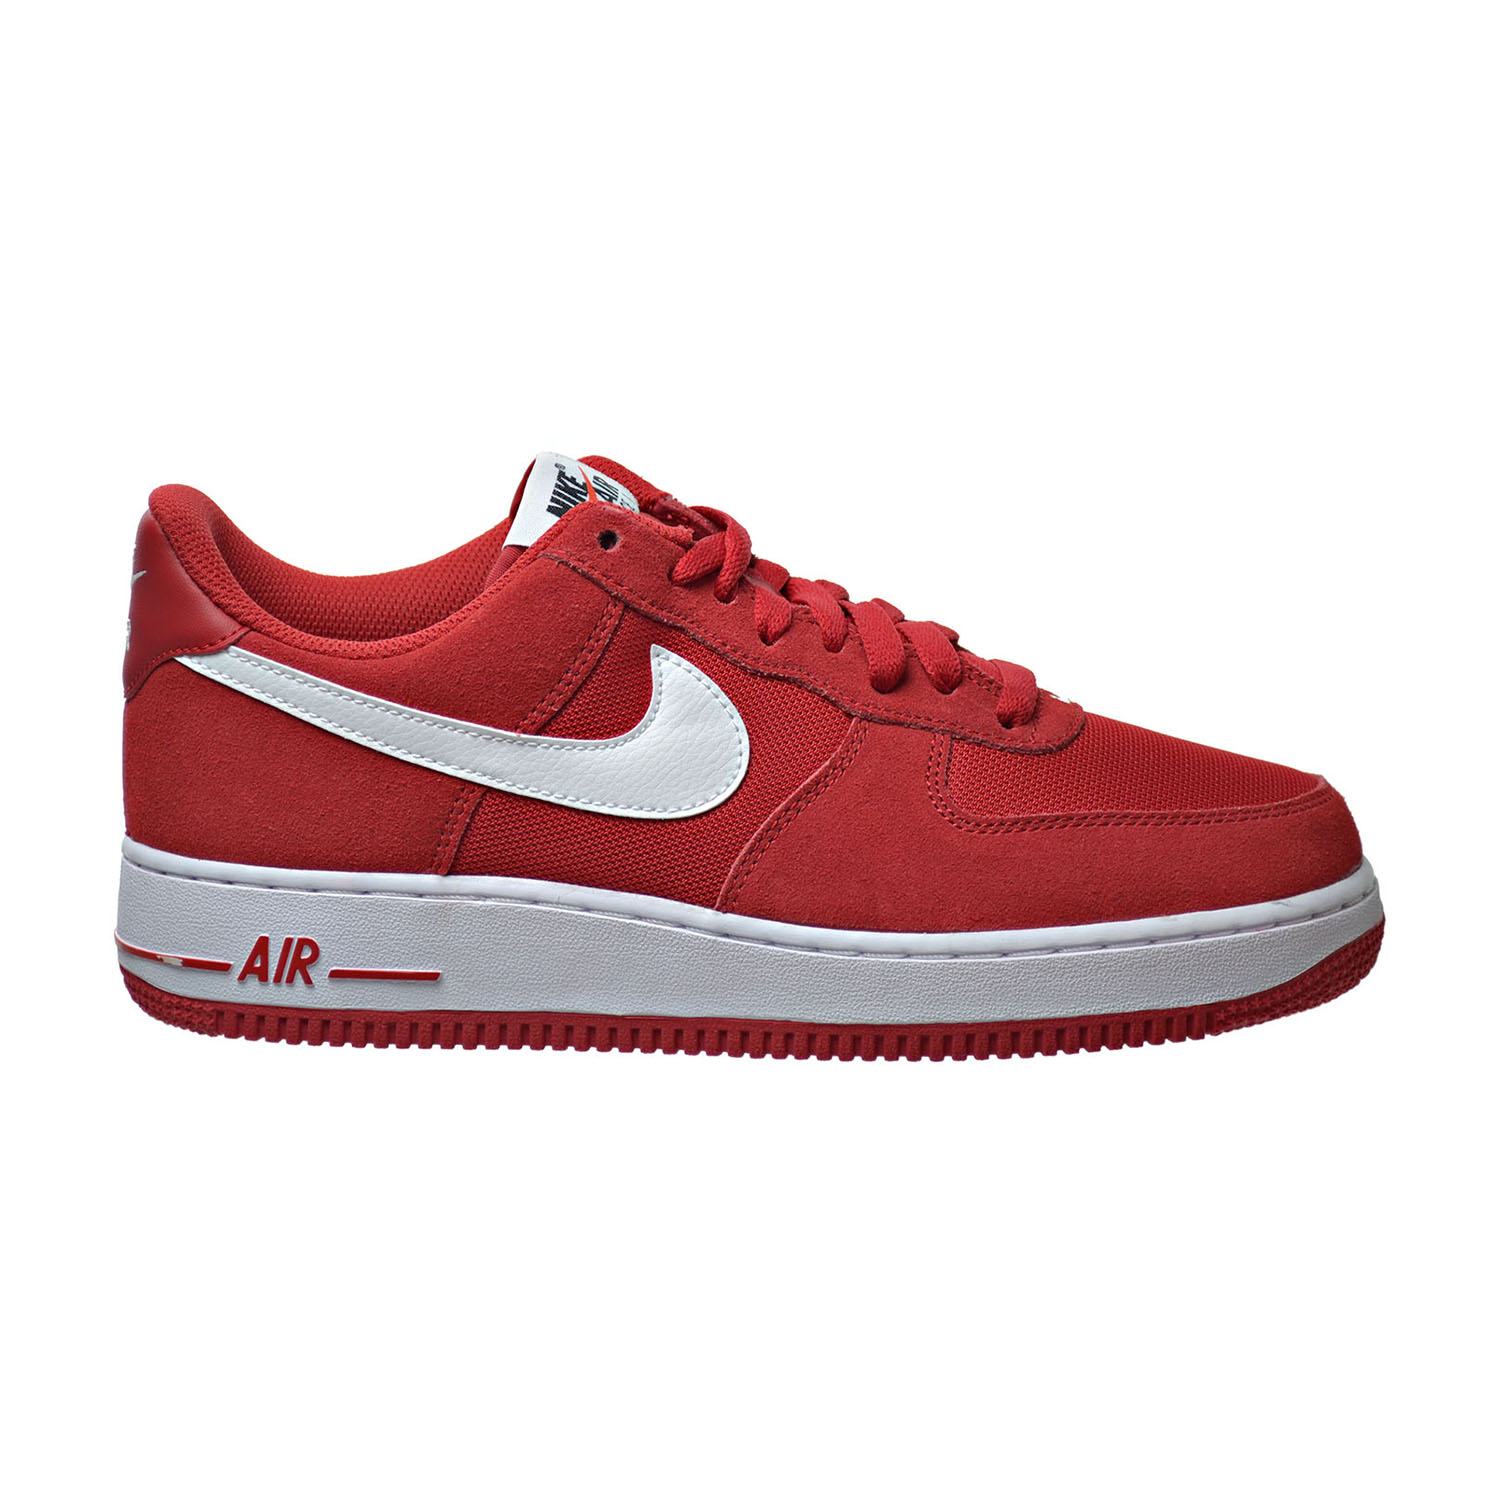 Nike Air Force 1 Men's Shoes Game Red/White Lightweight Shoes 820266 ...